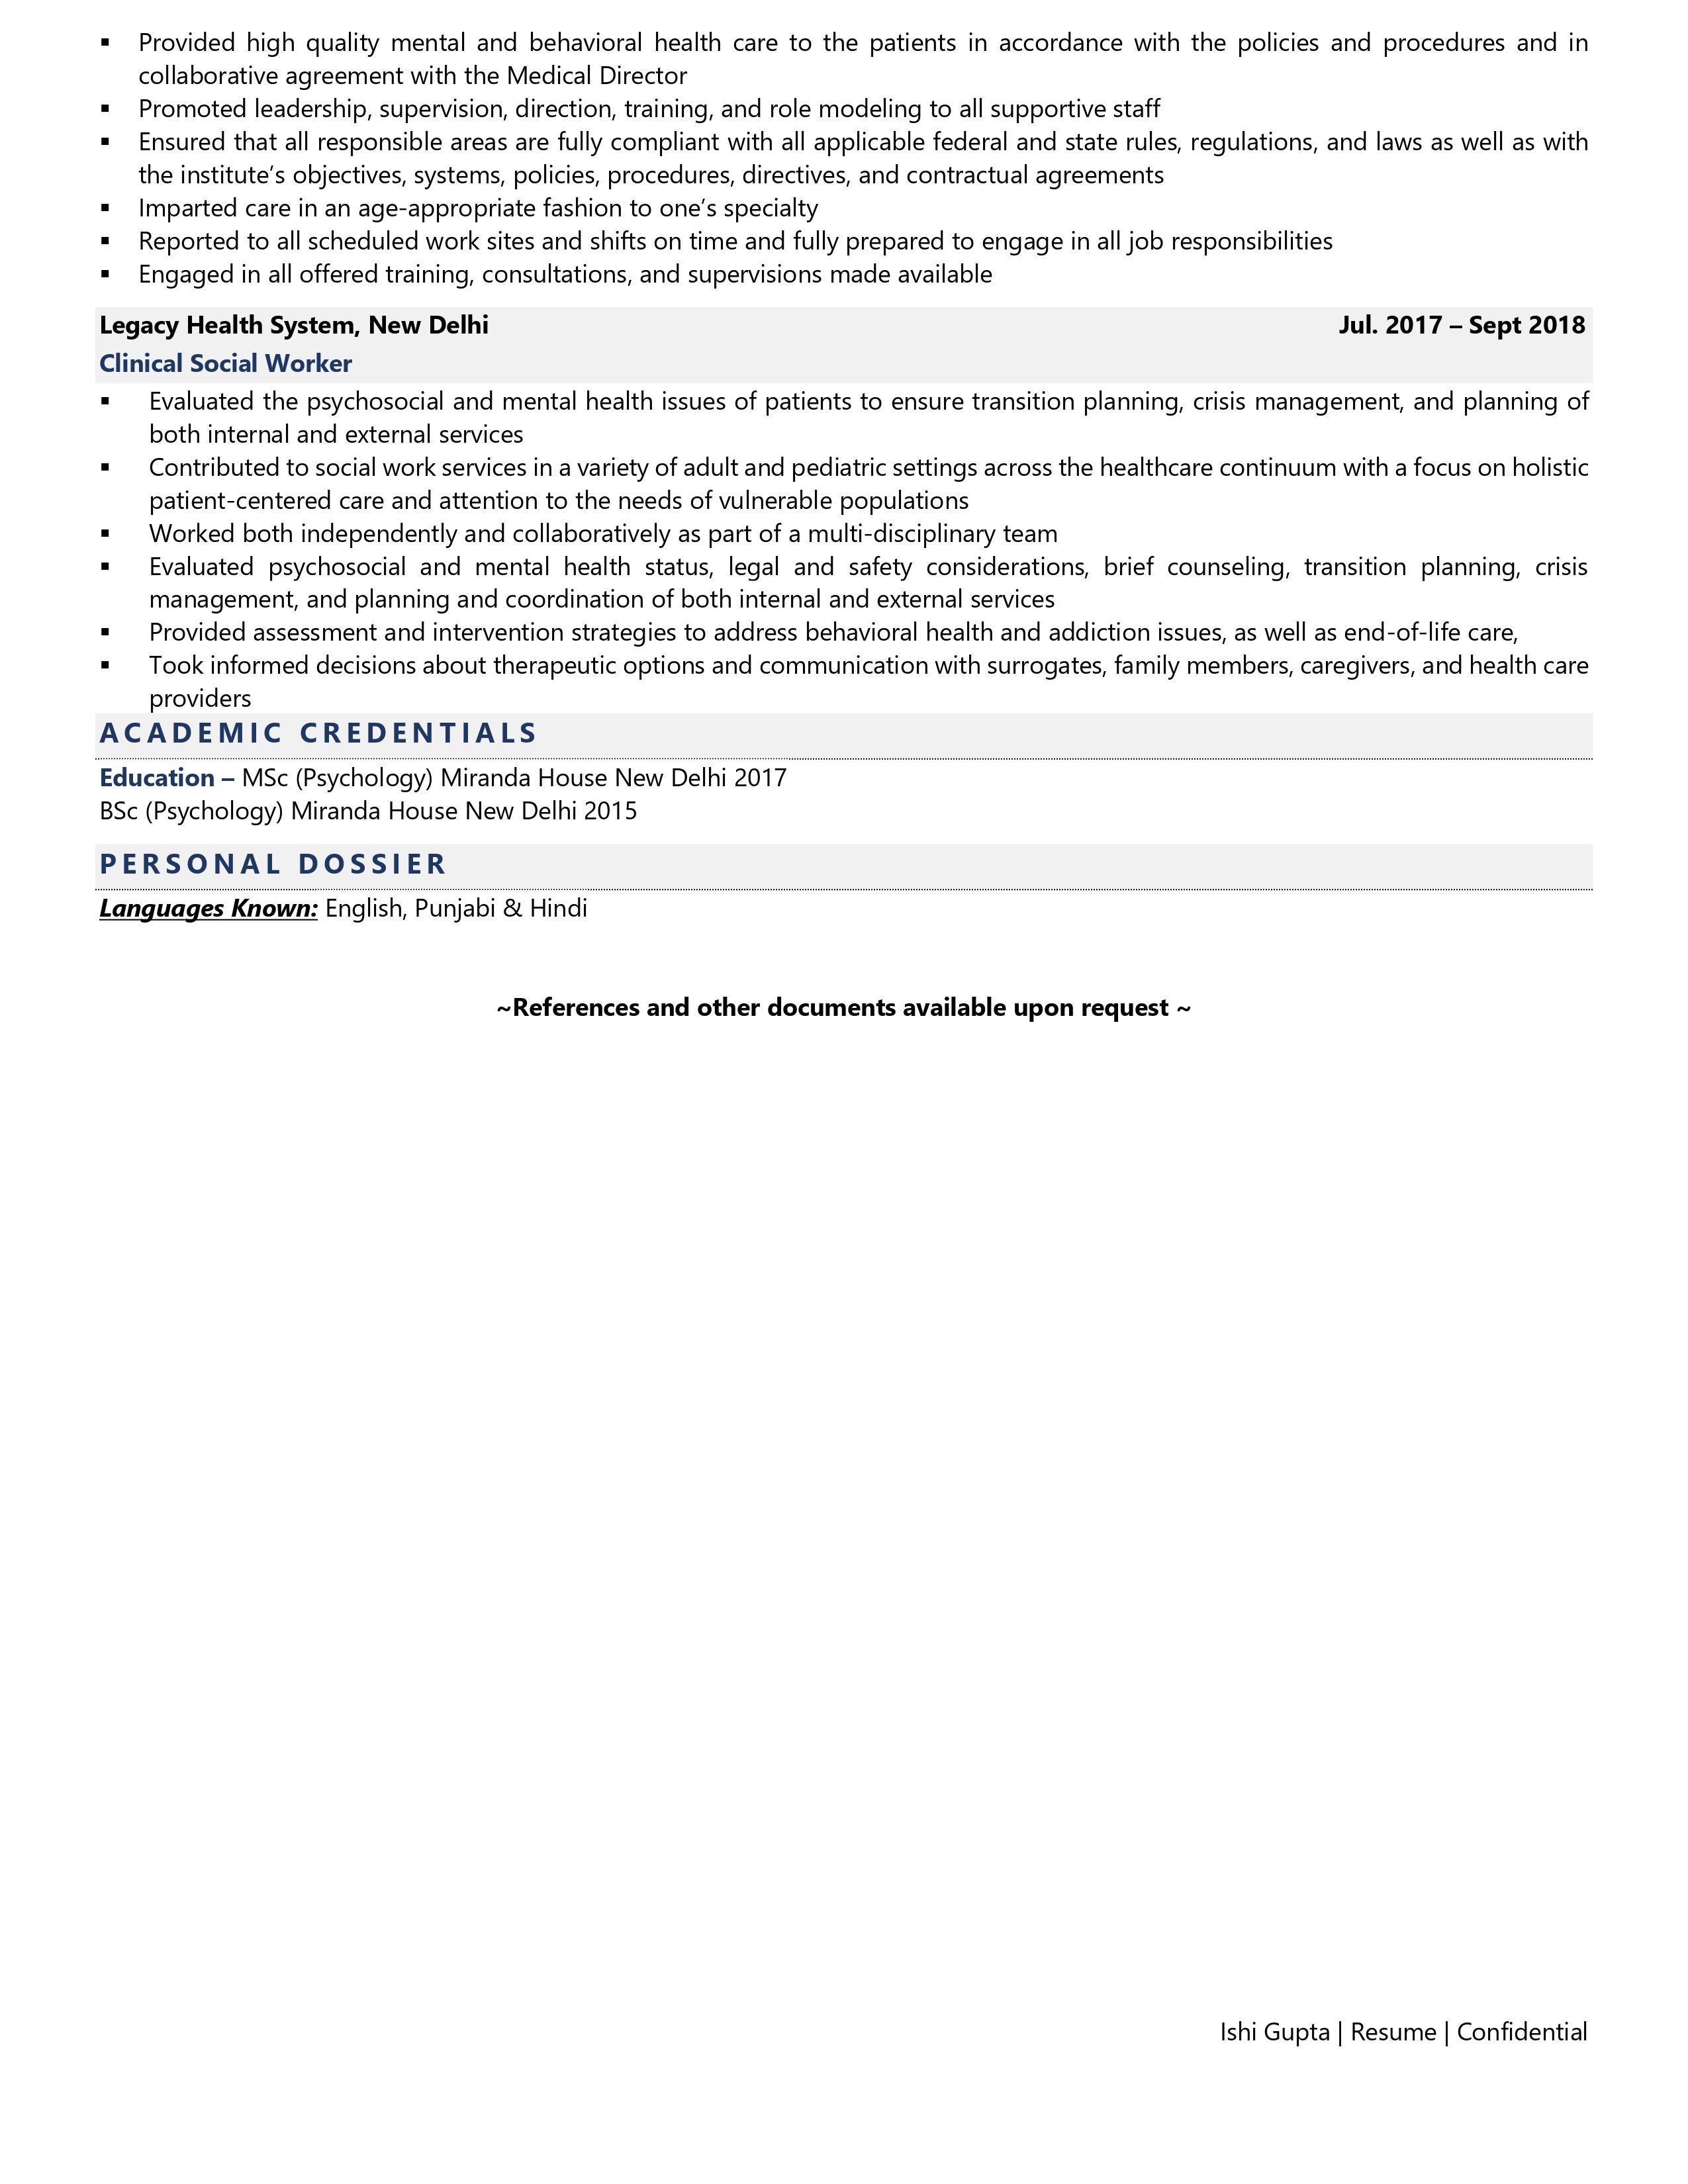 Clinical Social Worker - Resume Example & Template